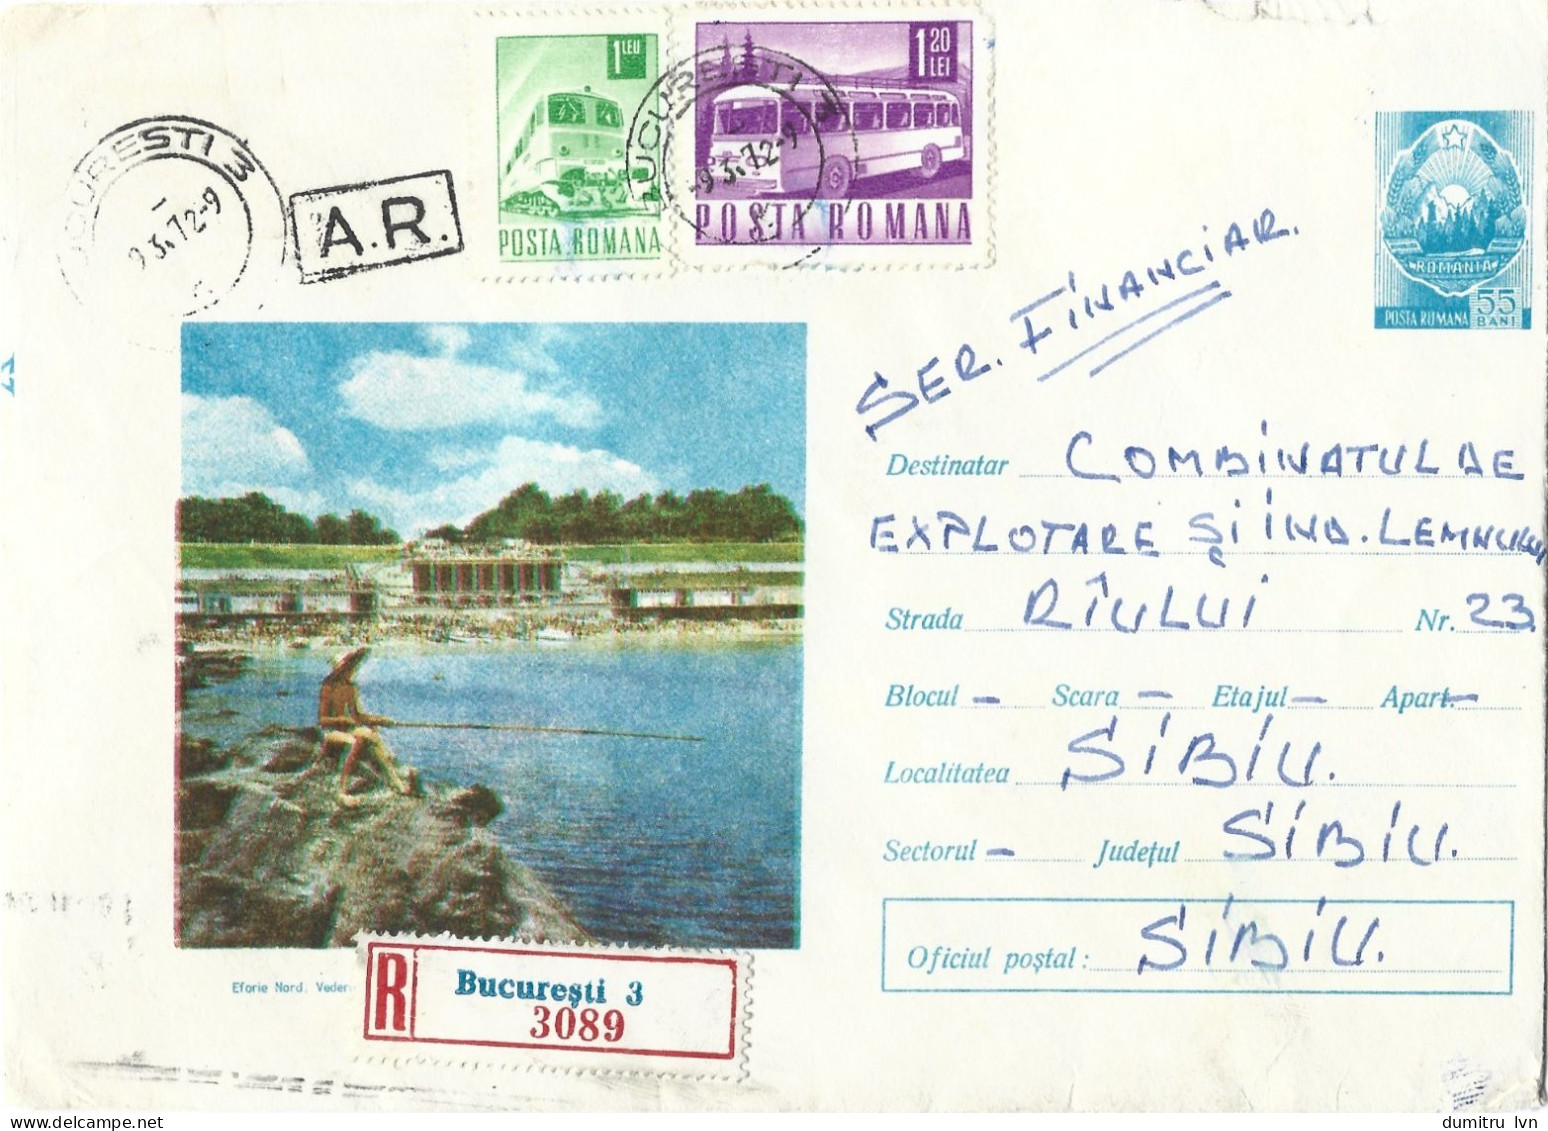 ROMANIA 1972 EFORIE NORD VIEW, PEOPLE FISHING, SEASIDE, BUILDING, BEACH, CIRCULATED ENVELOPE, COVER STATIONERY - Postal Stationery